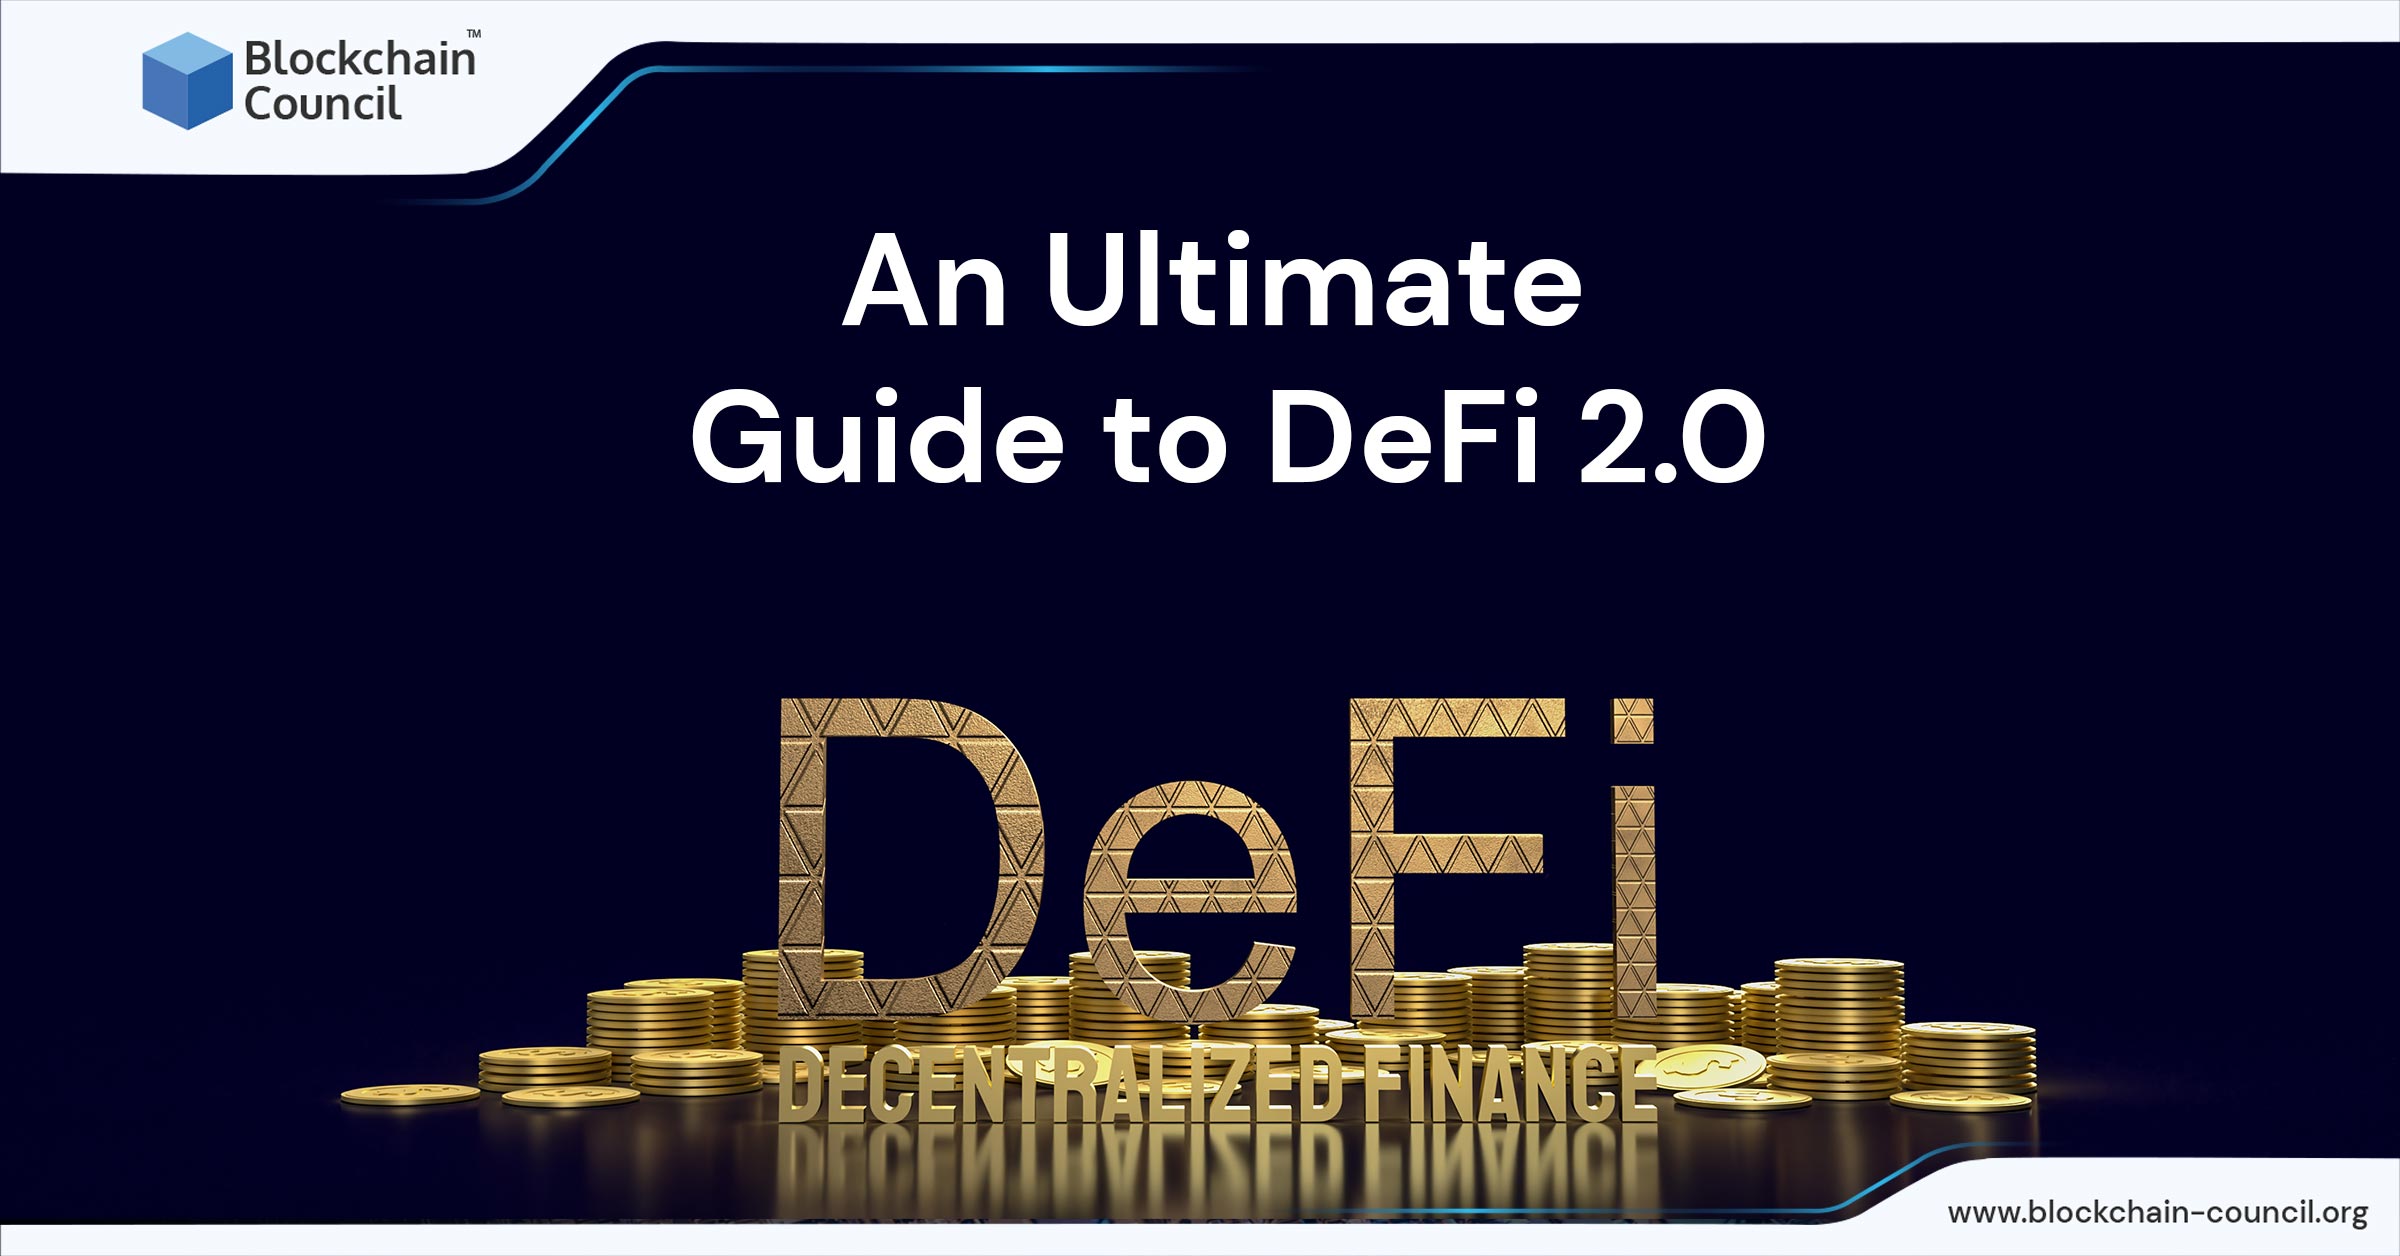 An Ultimate Guide to DeFi 2.0